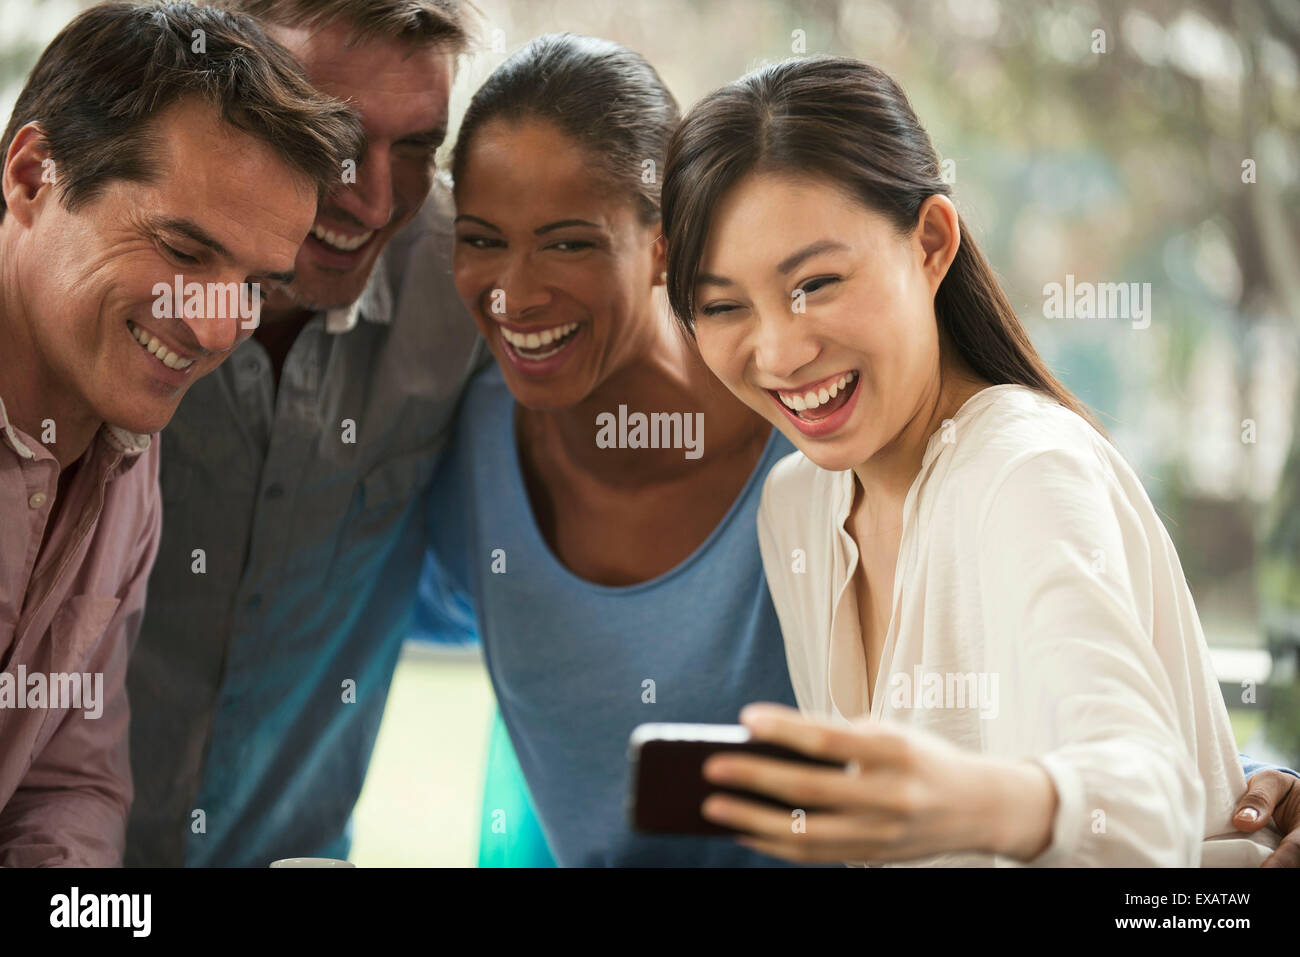 Friends posing for smartphone selfie, laughing cheerfully Stock Photo